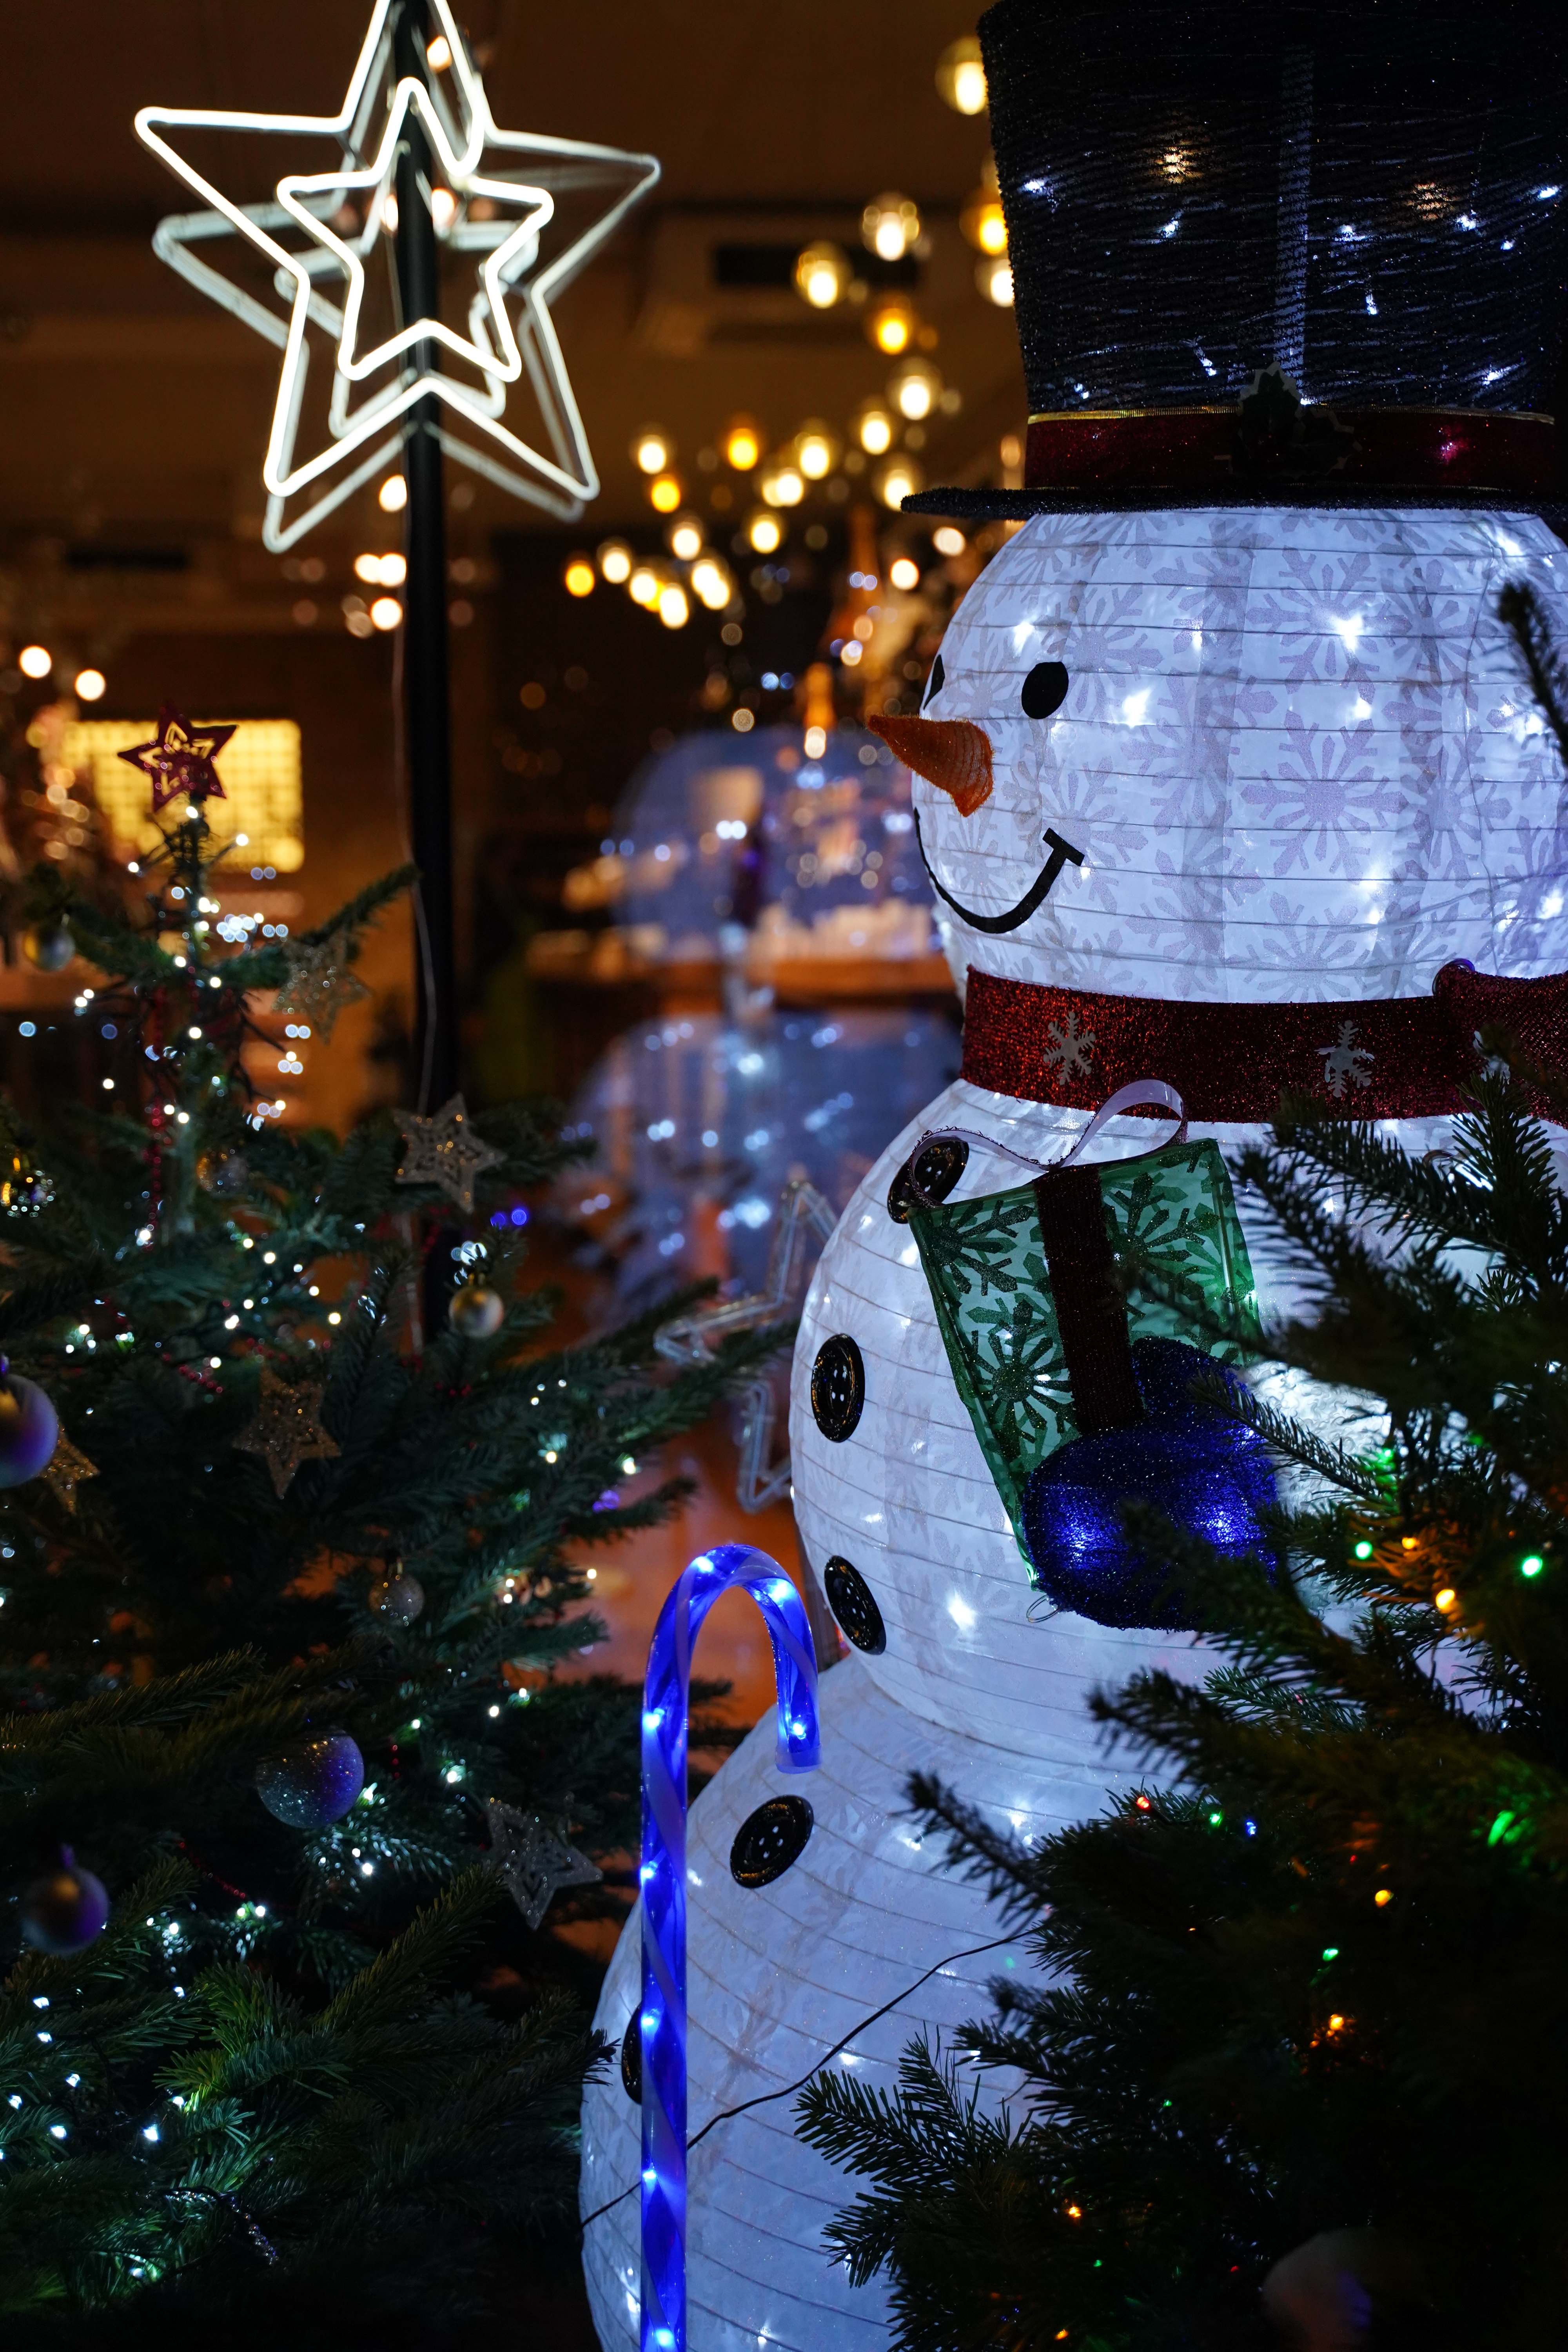 A large snowman beside a Christmas tree